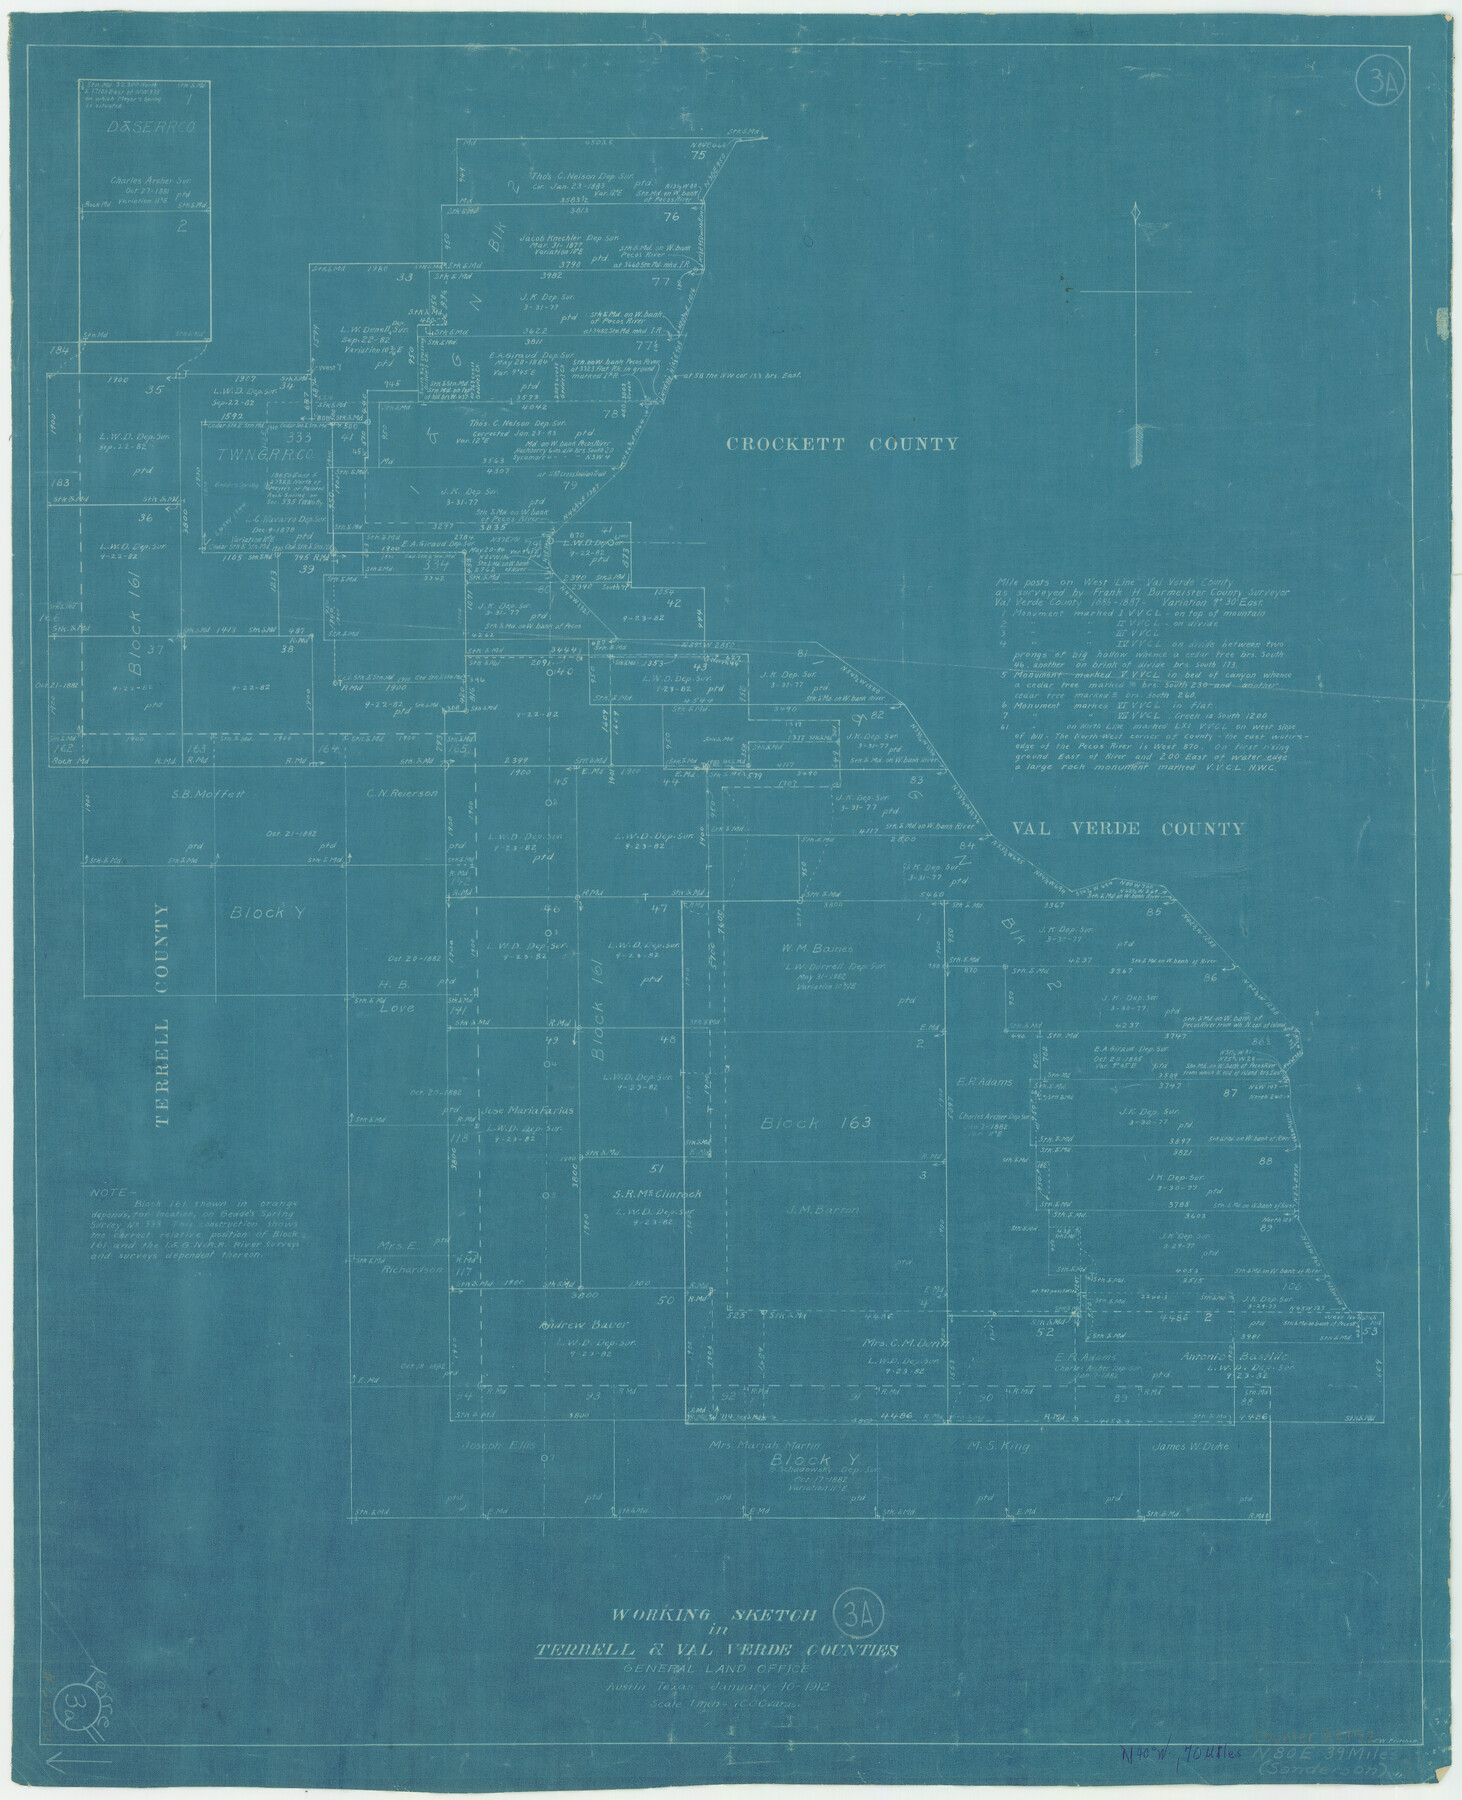 62152, Terrell County Working Sketch 3a, General Map Collection